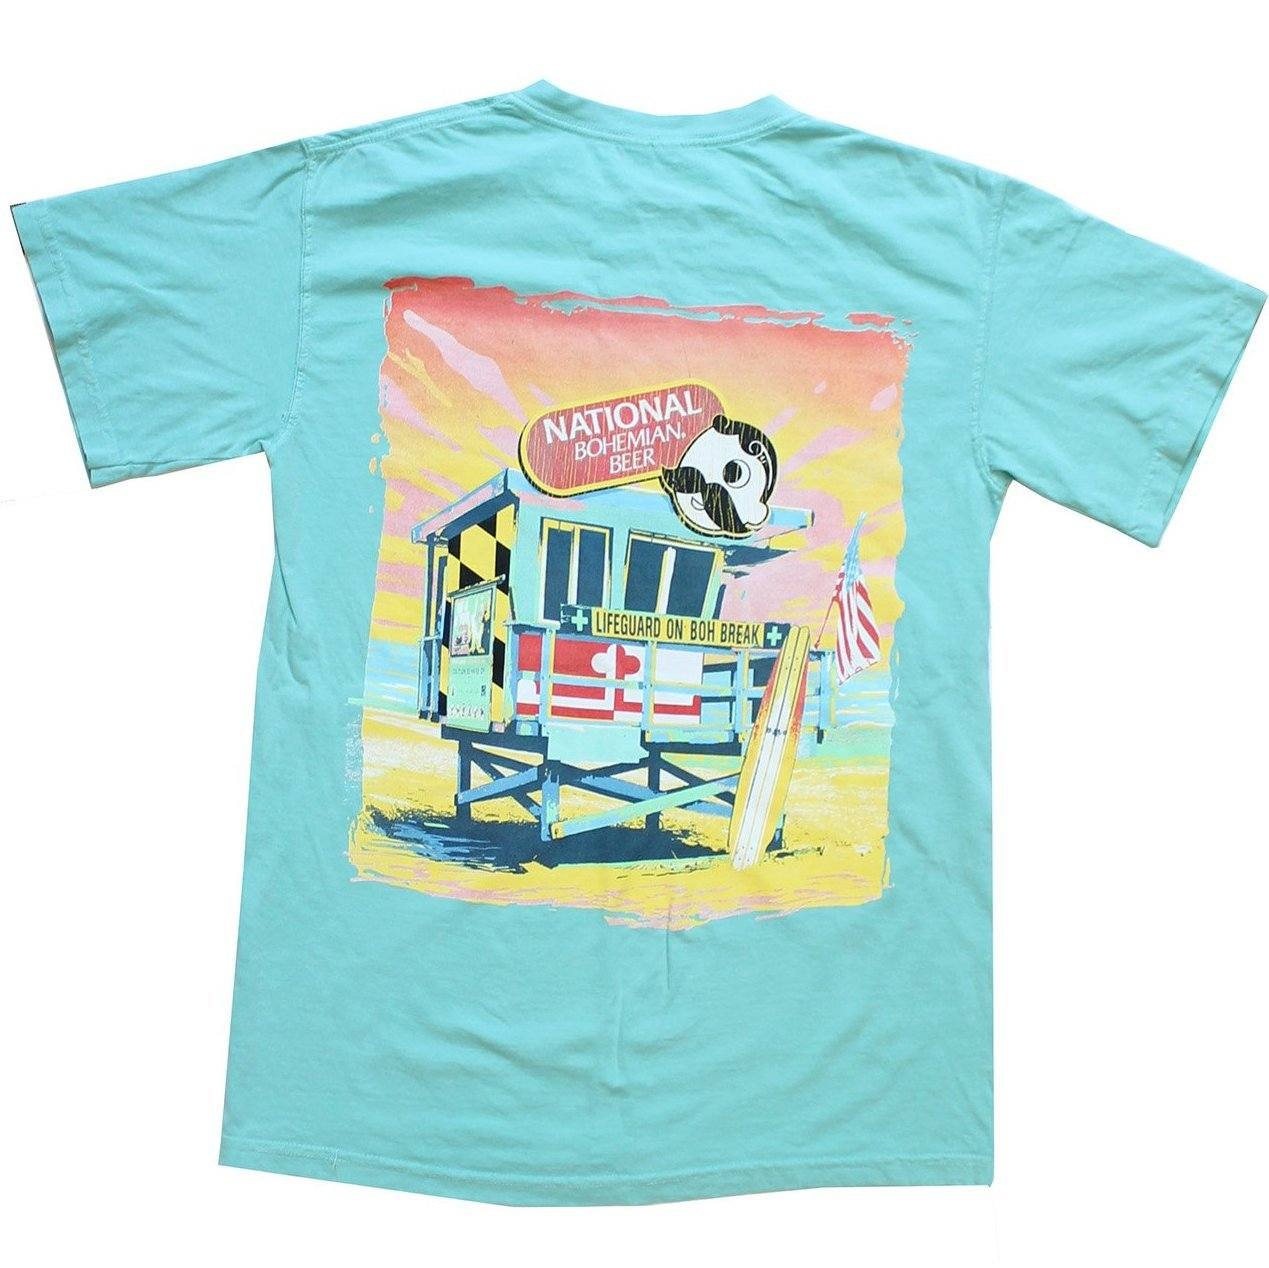 Natty Boh Lifeguard Stand (Chalky Mint) / Shirt - Route One Apparel